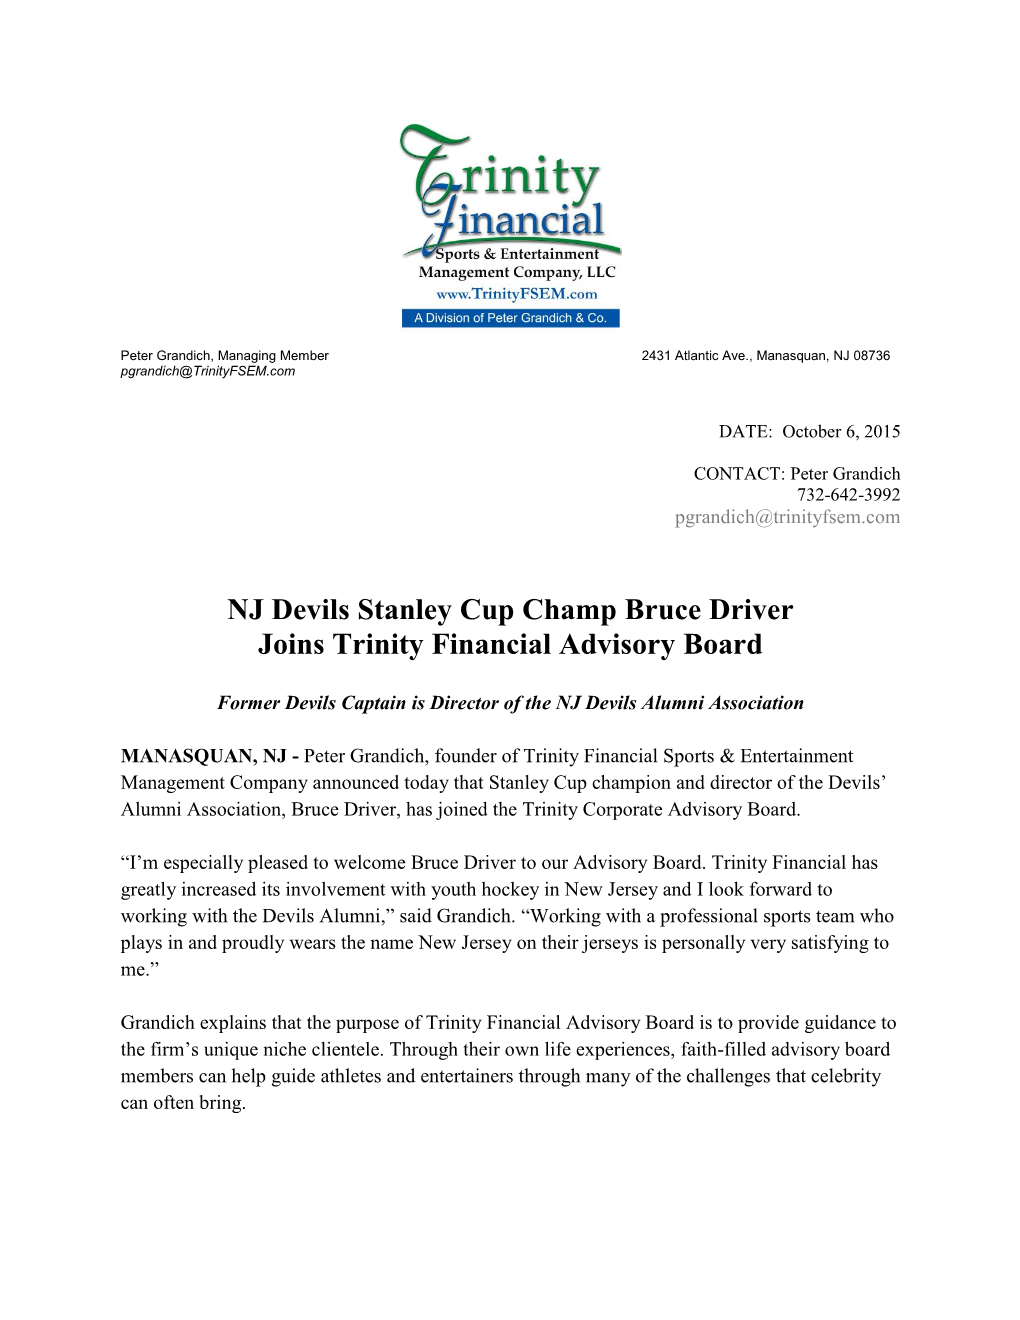 NJ Devils Stanley Cup Champ Bruce Driver Joins Trinity Financial Advisory Board